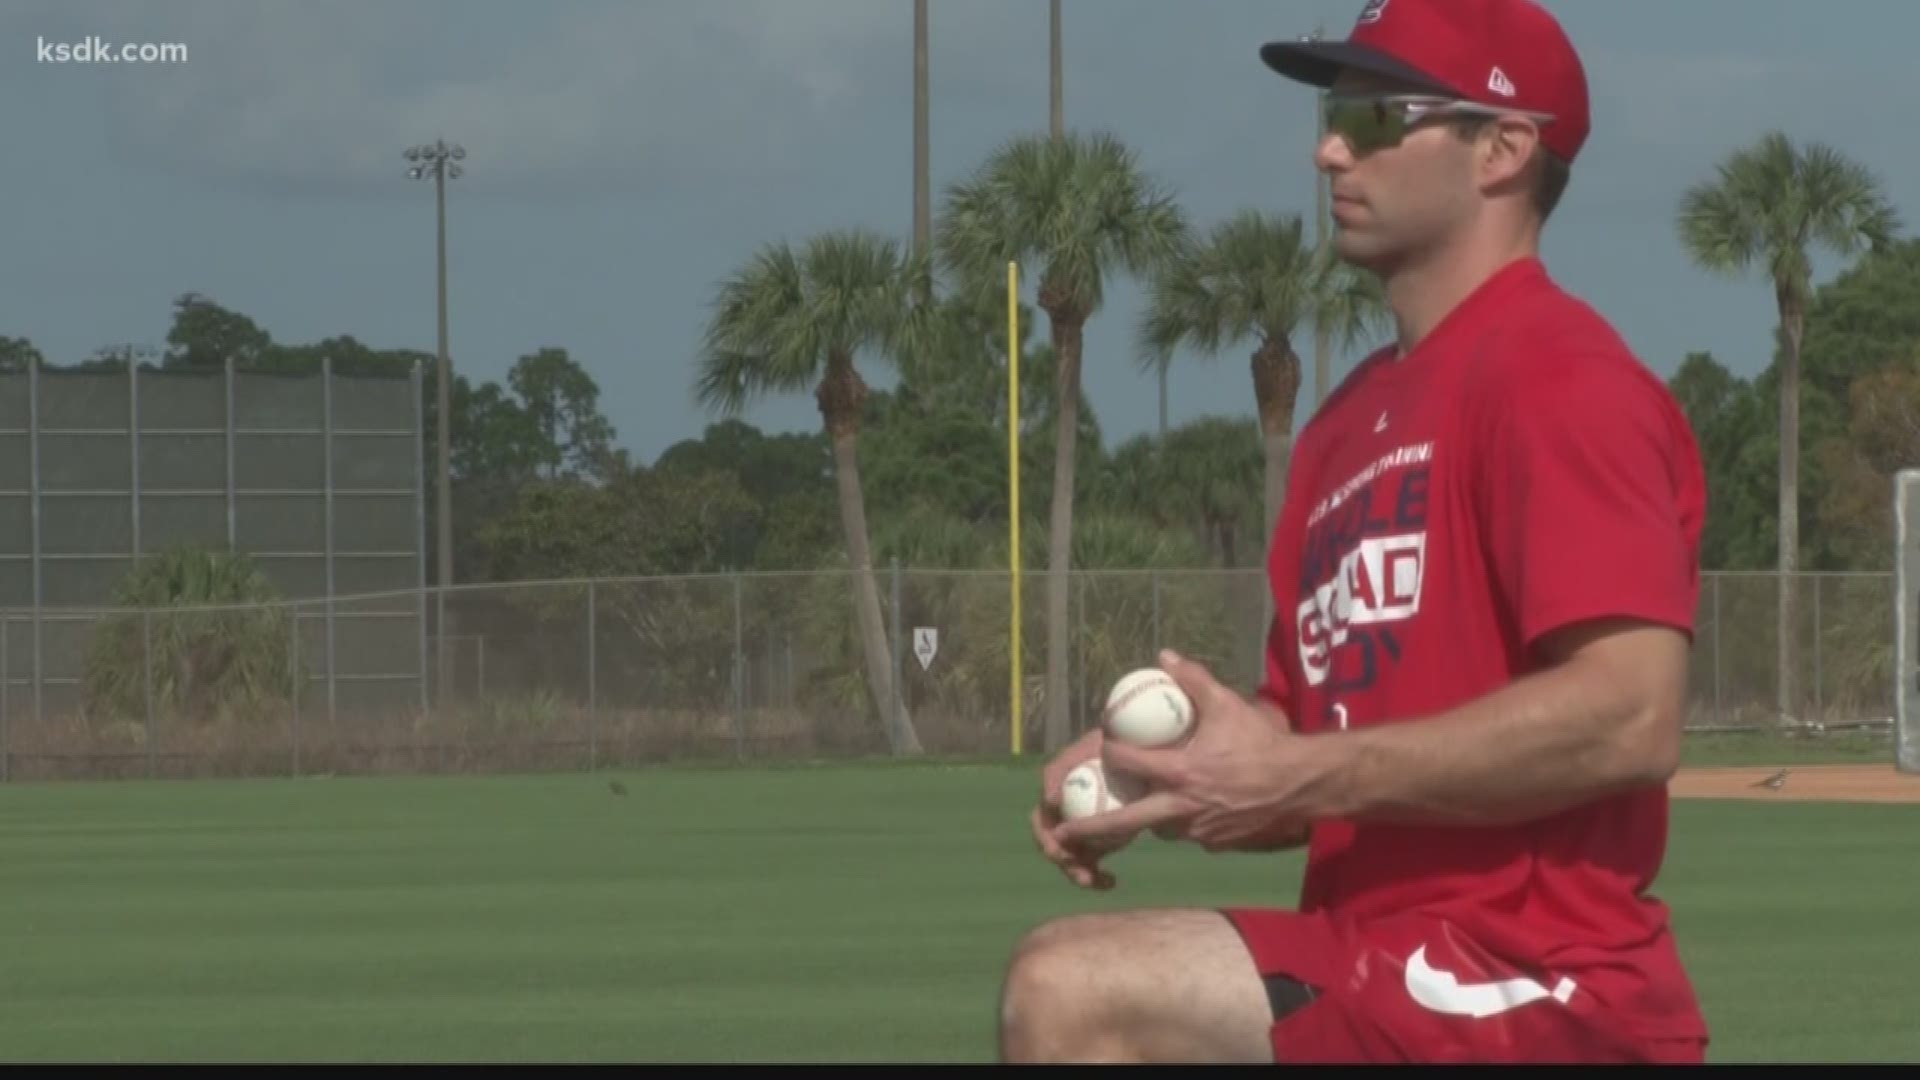 The new Cardinals star is already in Jupiter getting ready for the season.